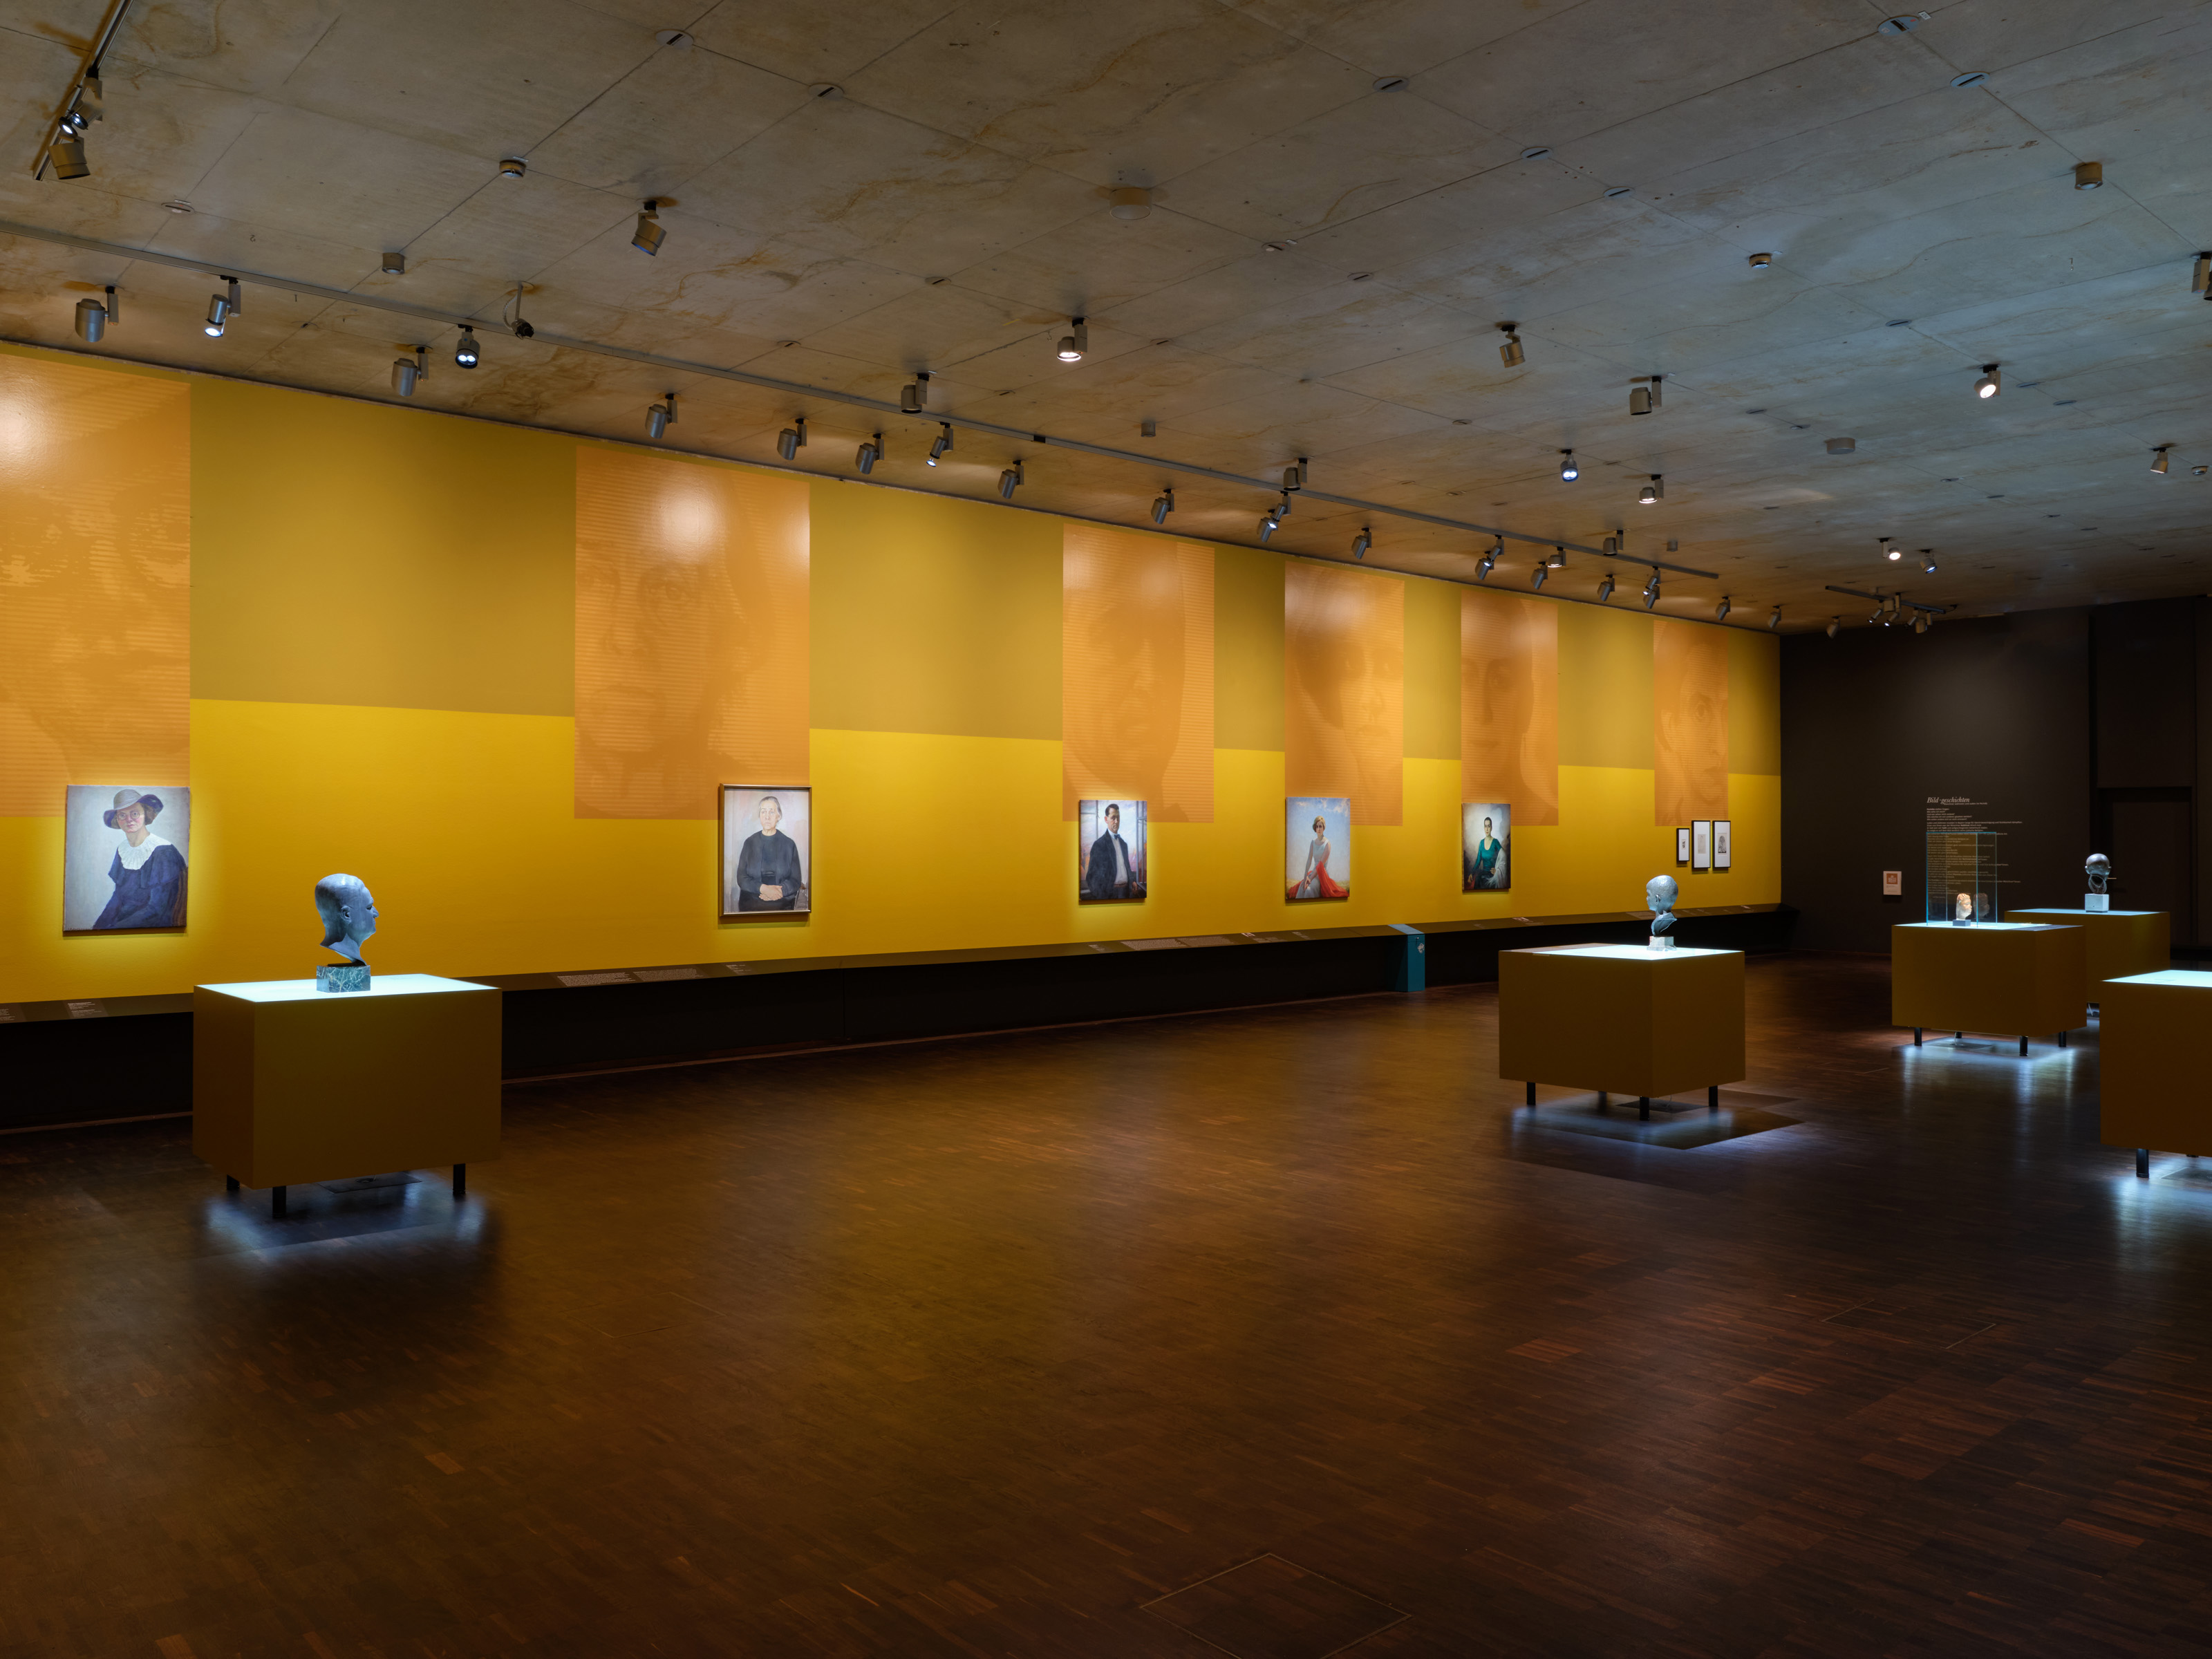 Exhibition view "Picture Stories. Portraits of Munich Jews" - several portraits hang side by side in an exhibition room in shades of yellow, large blow-ups reflect the motif of the portraits, photo: Eva Jünger / Jewish Museum Munich 